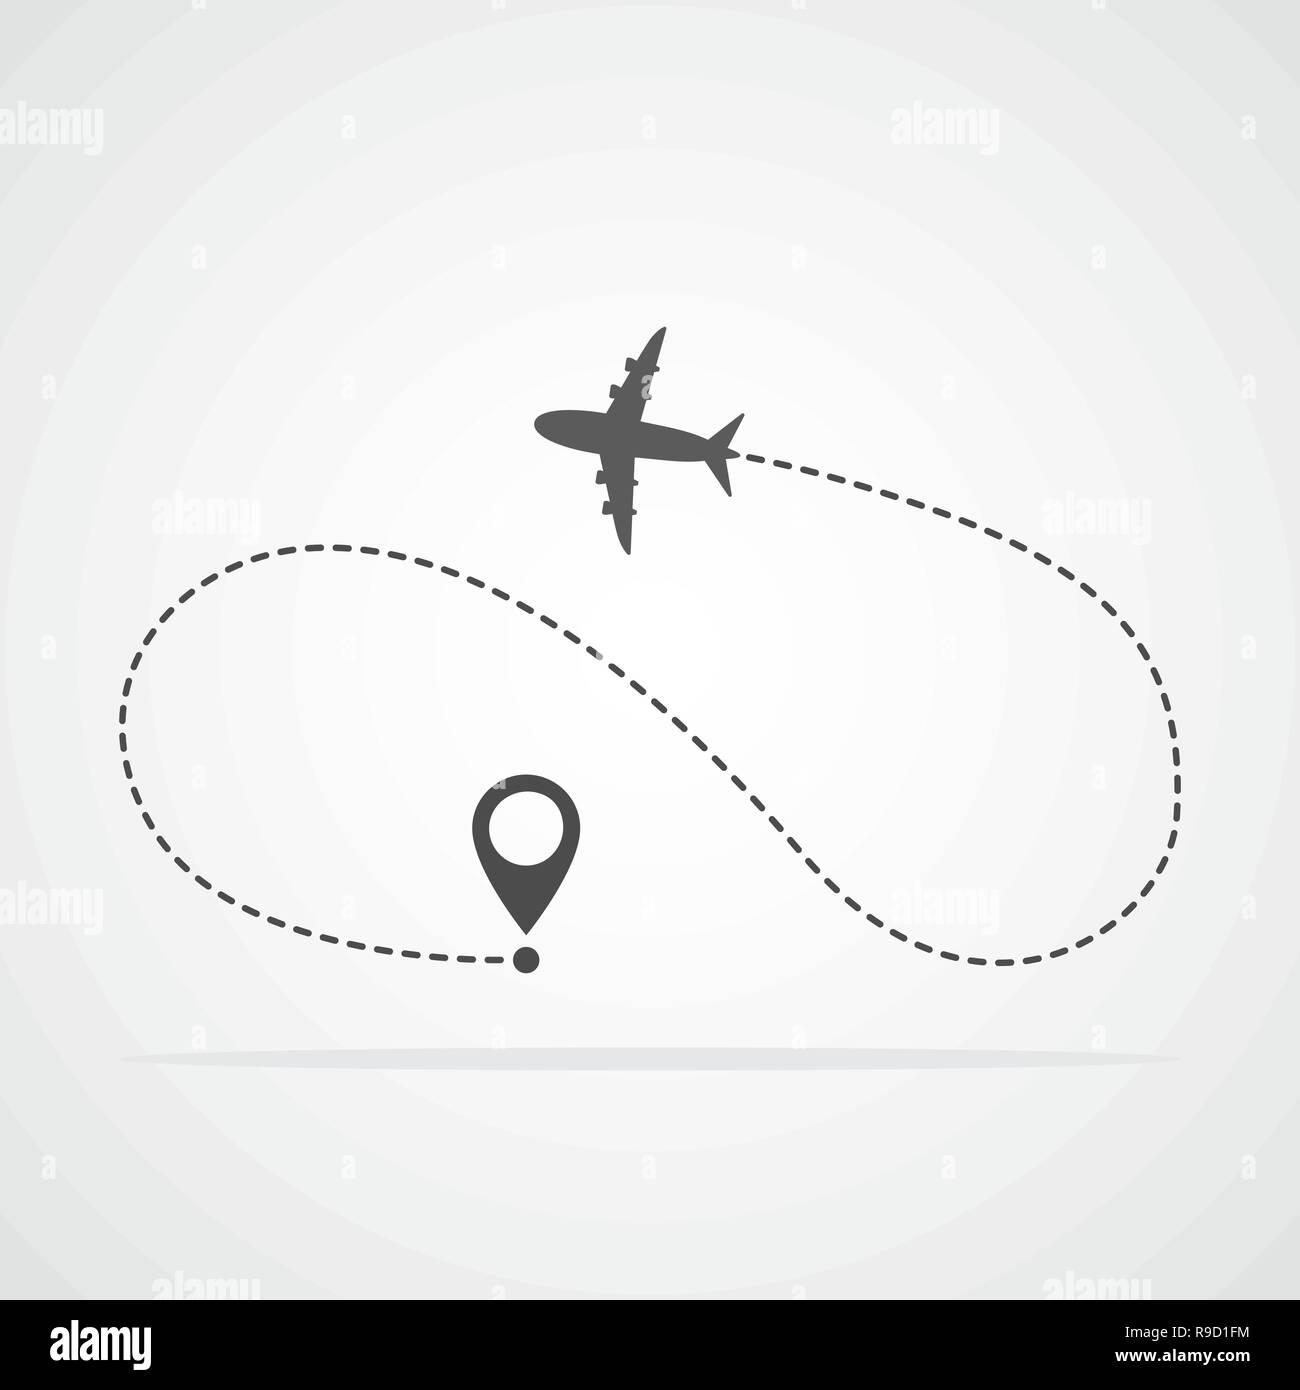 Plane and its traveling route or track with location markers. Vector illustration. Travel concept Stock Vector